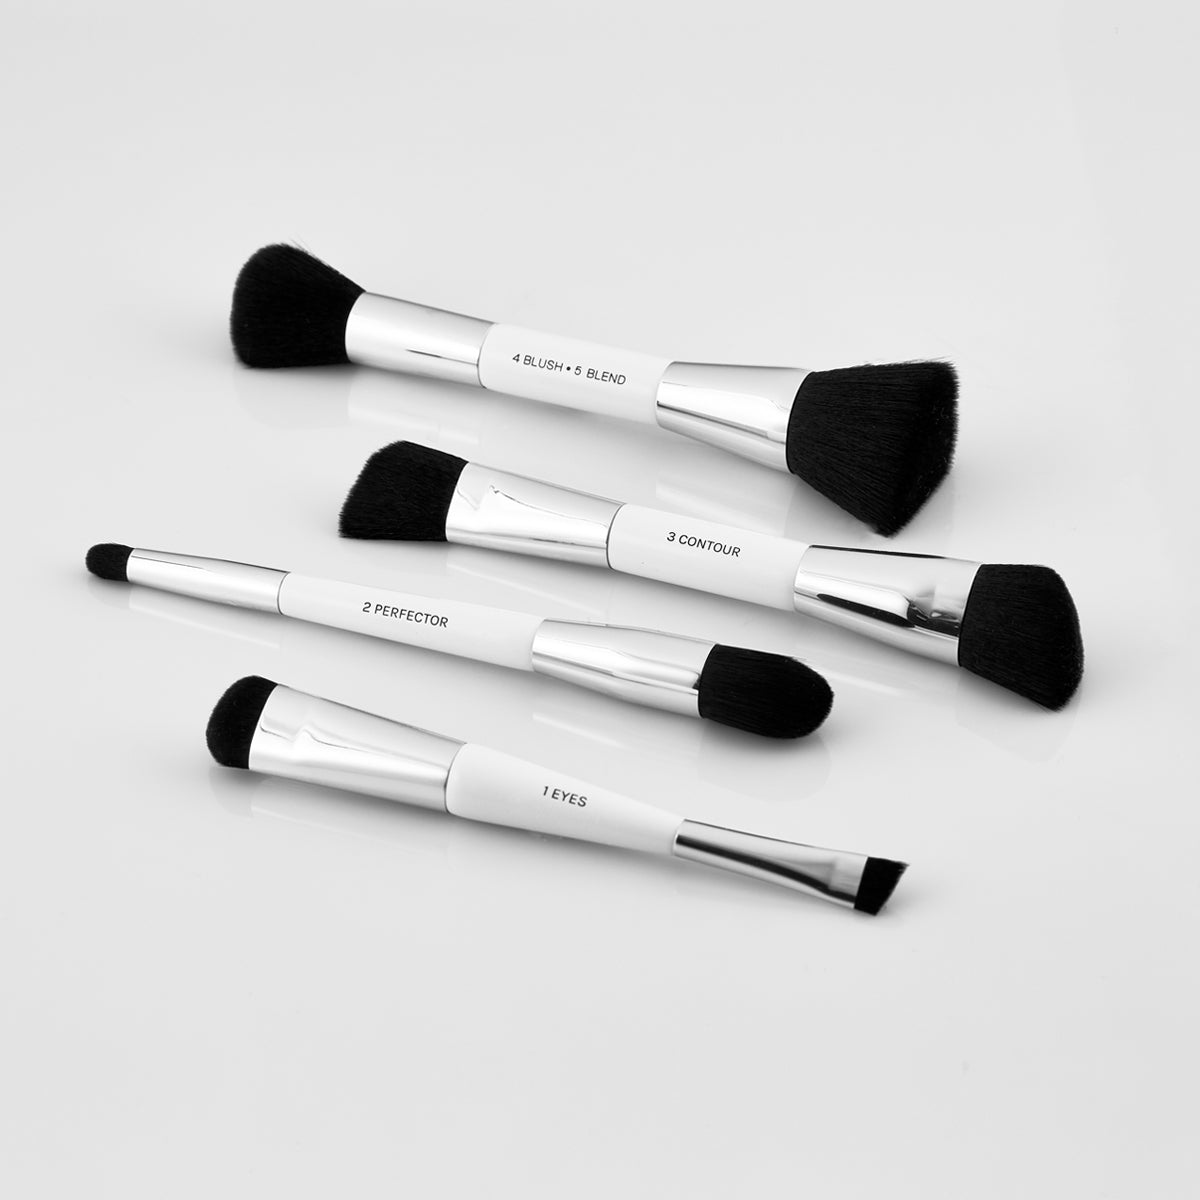 4 Dual ended Essential Brushes. 1 eyes/eyeshadow brush with angled end for eyeliner and domed end for shadow. 2 concealer brush for blemishes and larger blending end. 3 contour brush with smaller angled end for highlighting and larger angled end for contour. 4 blush and 5 blend brush for applying blushes and foundation powders.